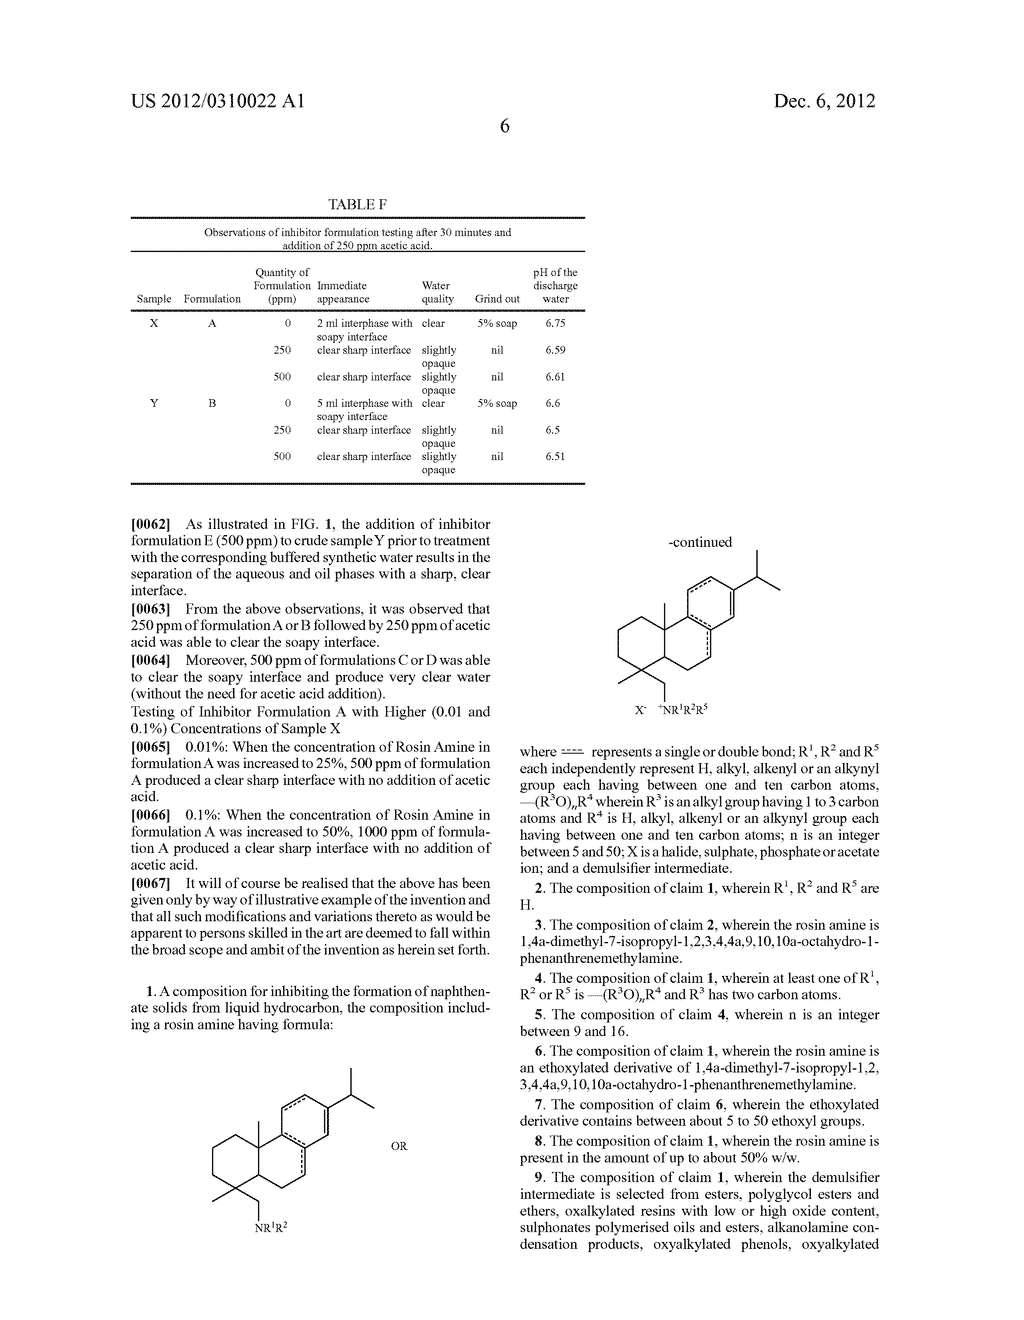 Compositions And Methods For Inhibiting Naphthenate Solids Formation From     Liquid Hydrocarbons - diagram, schematic, and image 08